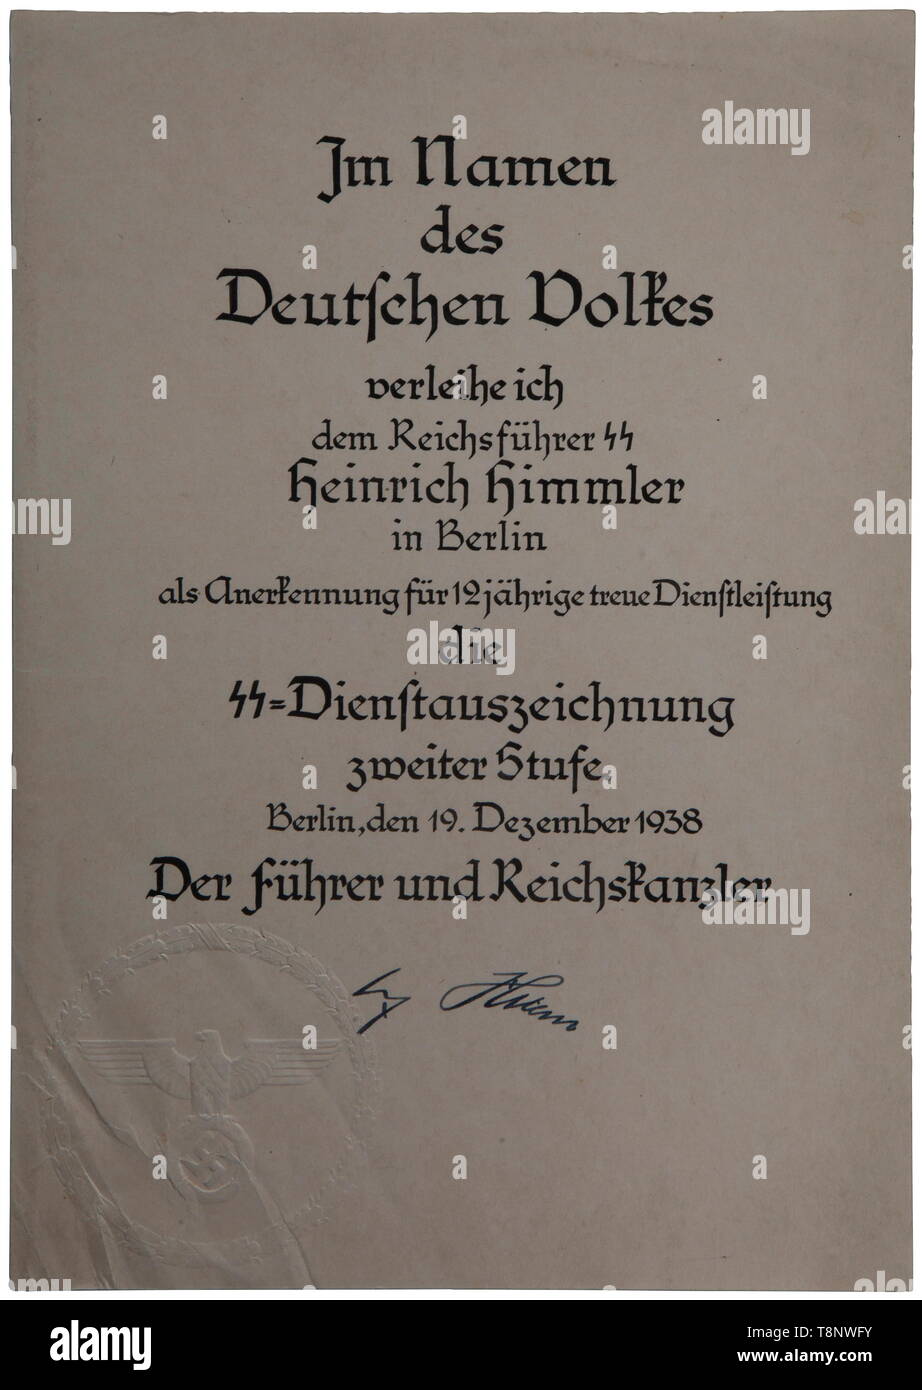 Heinrich Himmler's award document for an SS service medal, grade II Issued in Berlin to Reichsführer SS Heinrich Himmler, by Adolf Hitler, 19 December 1938, for twelve years of service in the SS. Size 30 x 22 cm. The text is completed in fine calligraphy. Bottom left-hand corner features a raised seal comprising an eagle and swastika within a wreath, on the right a signature of Adolf Hitler. Very rare. USA-lot, see page 5. historic, historical, 20th century, 1930s, 1940s, Waffen-SS, armed division of the SS, armed service, armed services, NS, National Socialism, Nazism, Thi, Editorial-Use-Only Stock Photo